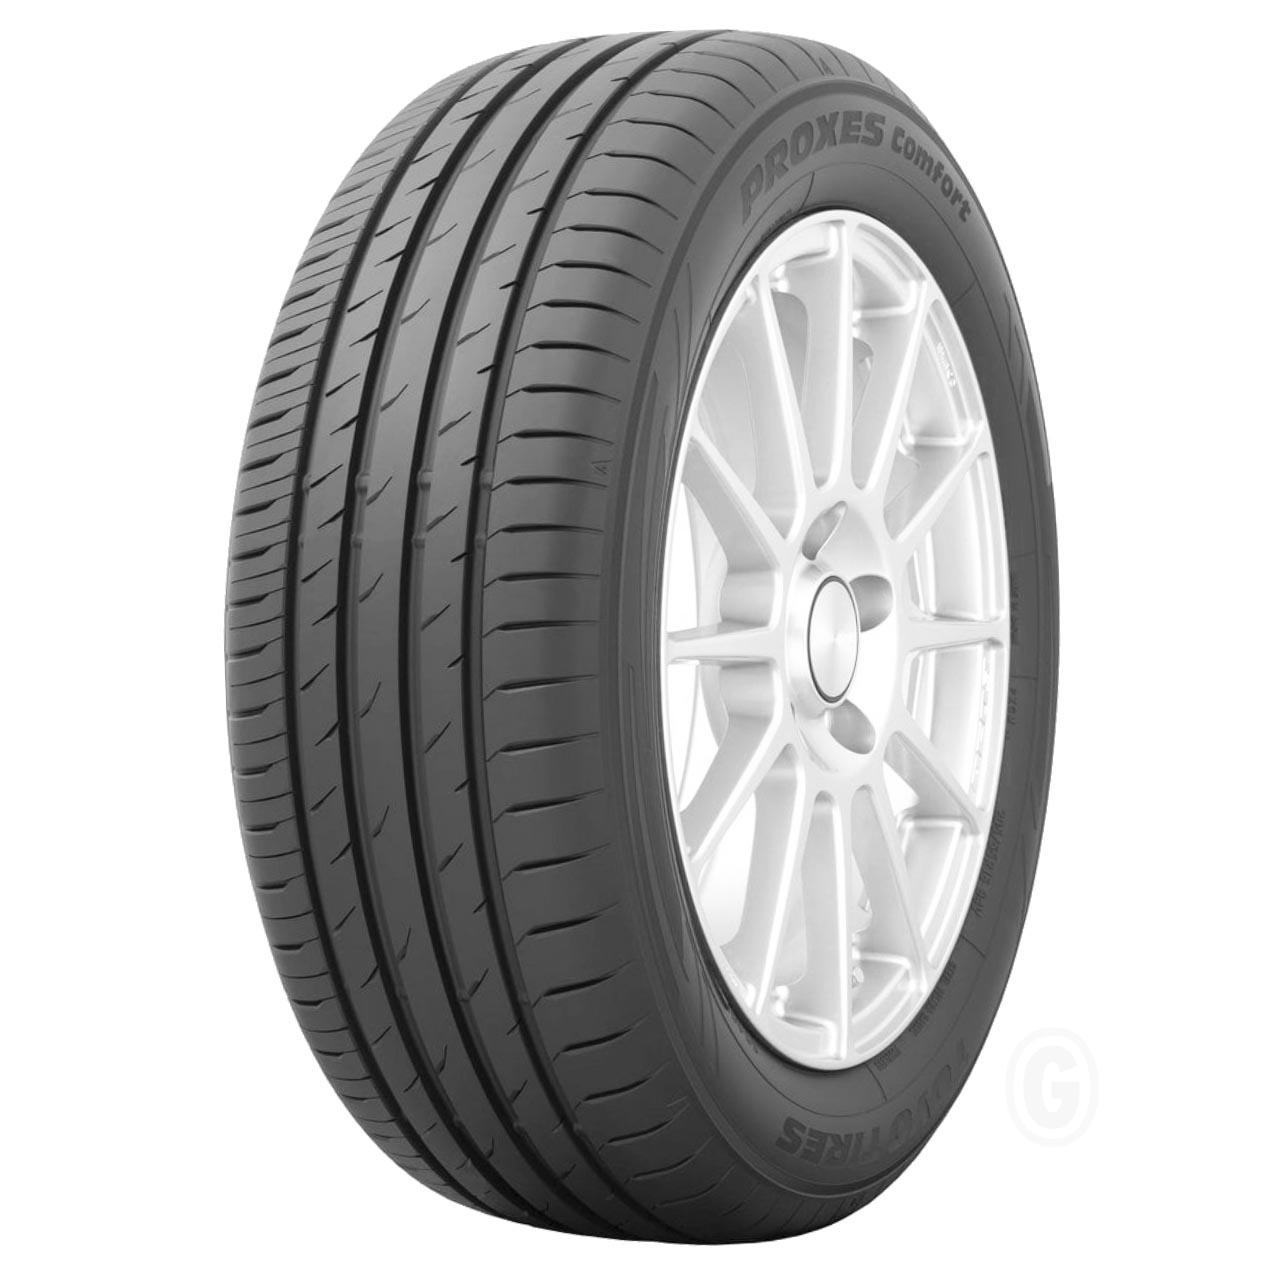 Toyo Proxes Comfort 225/40R19 93W XL